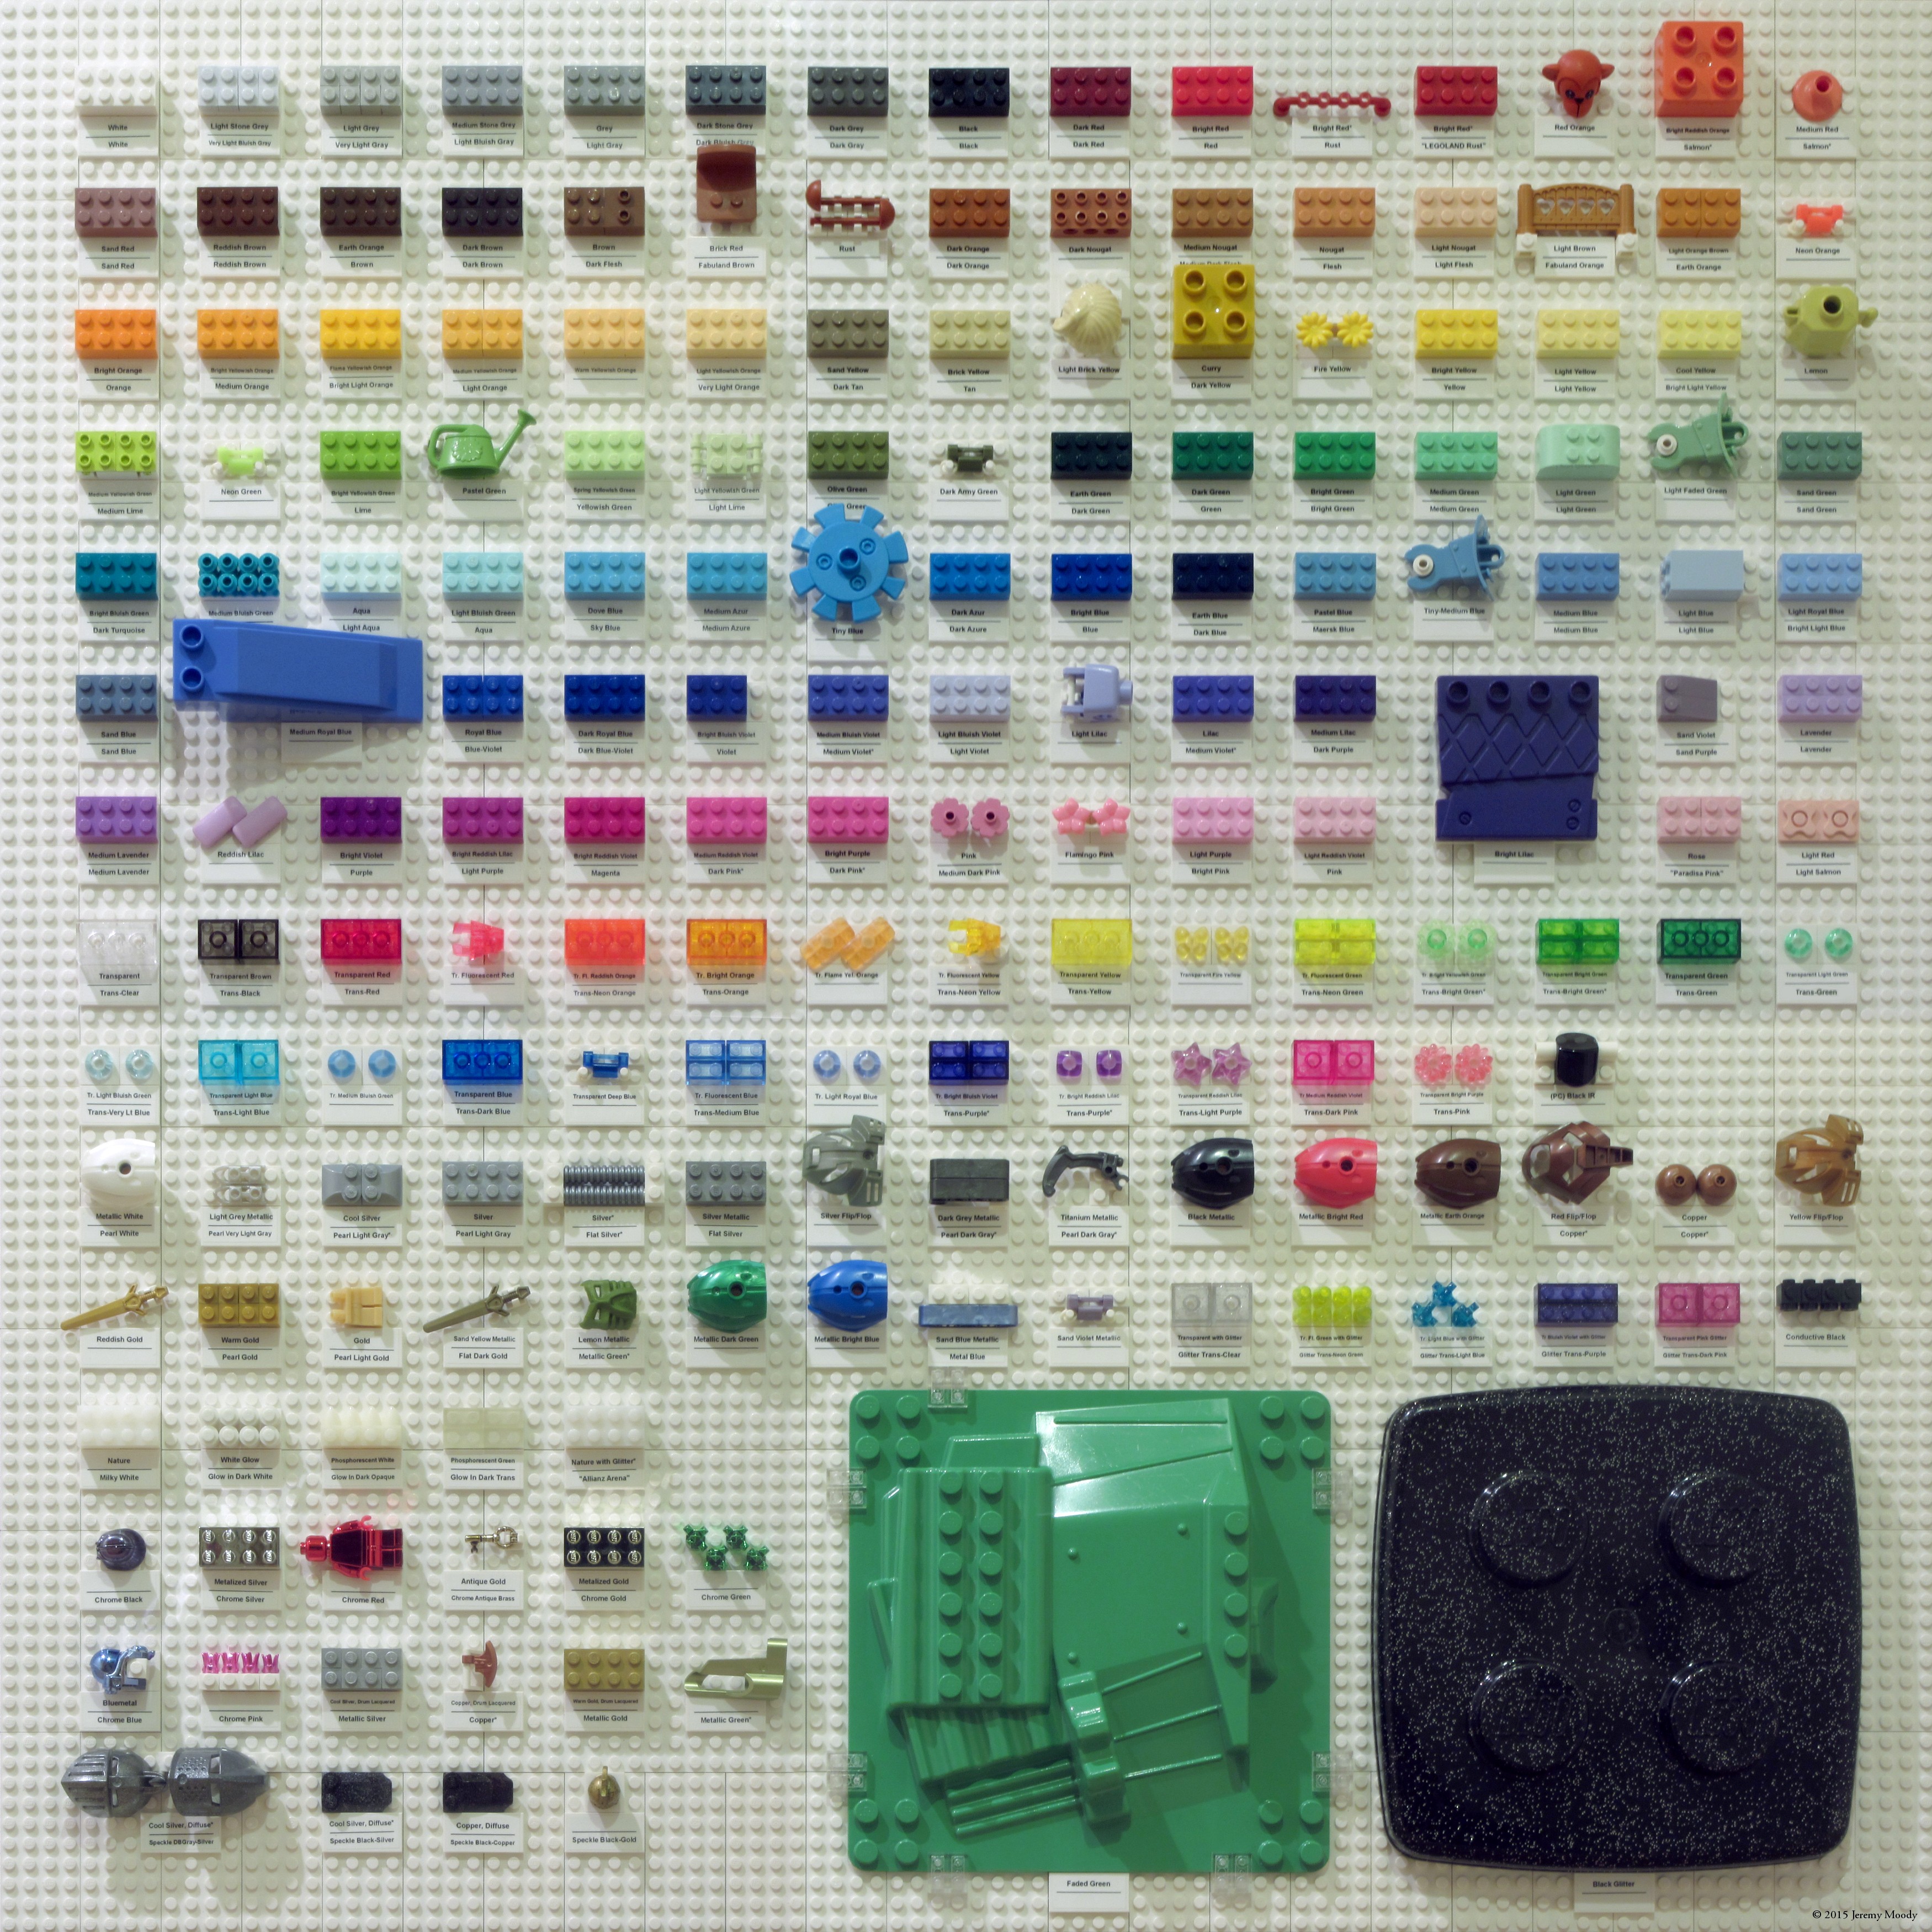 Collector Put Together a Huge Chart of Every LEGO Color Ever Produced